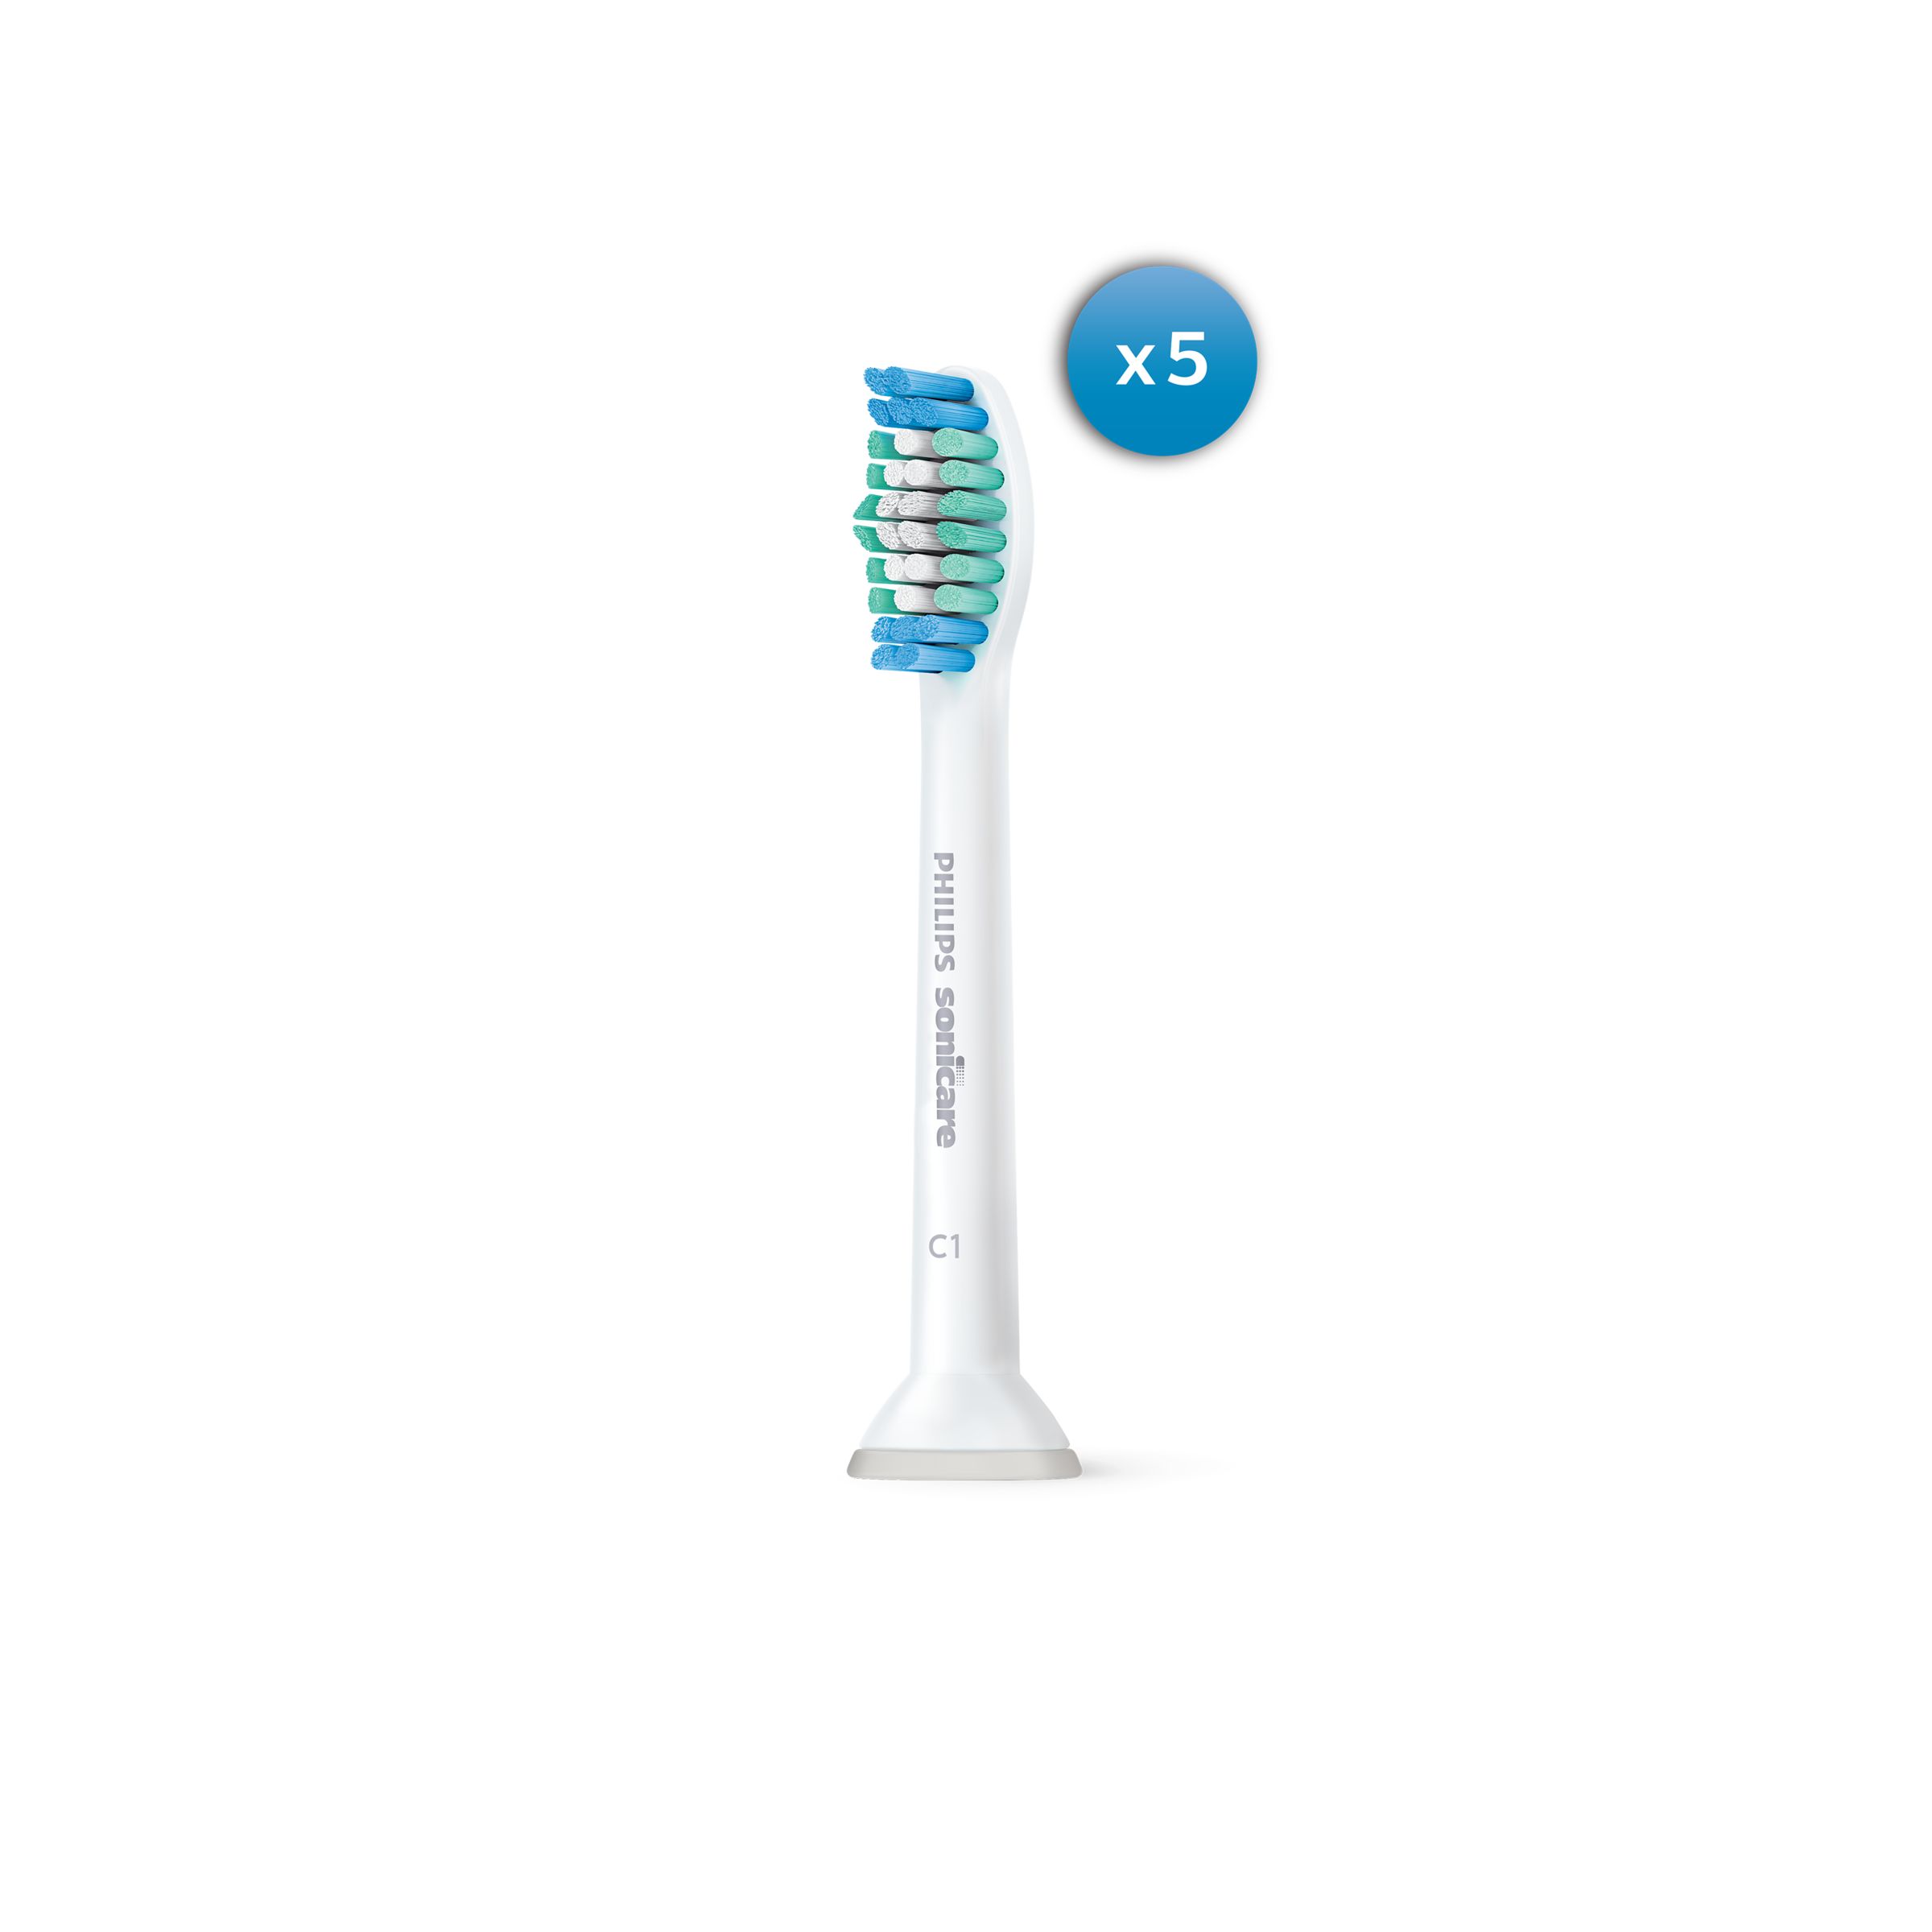 Image of Philips C1 SimplyClean - Standard sonic toothbrush heads - HX6015/03